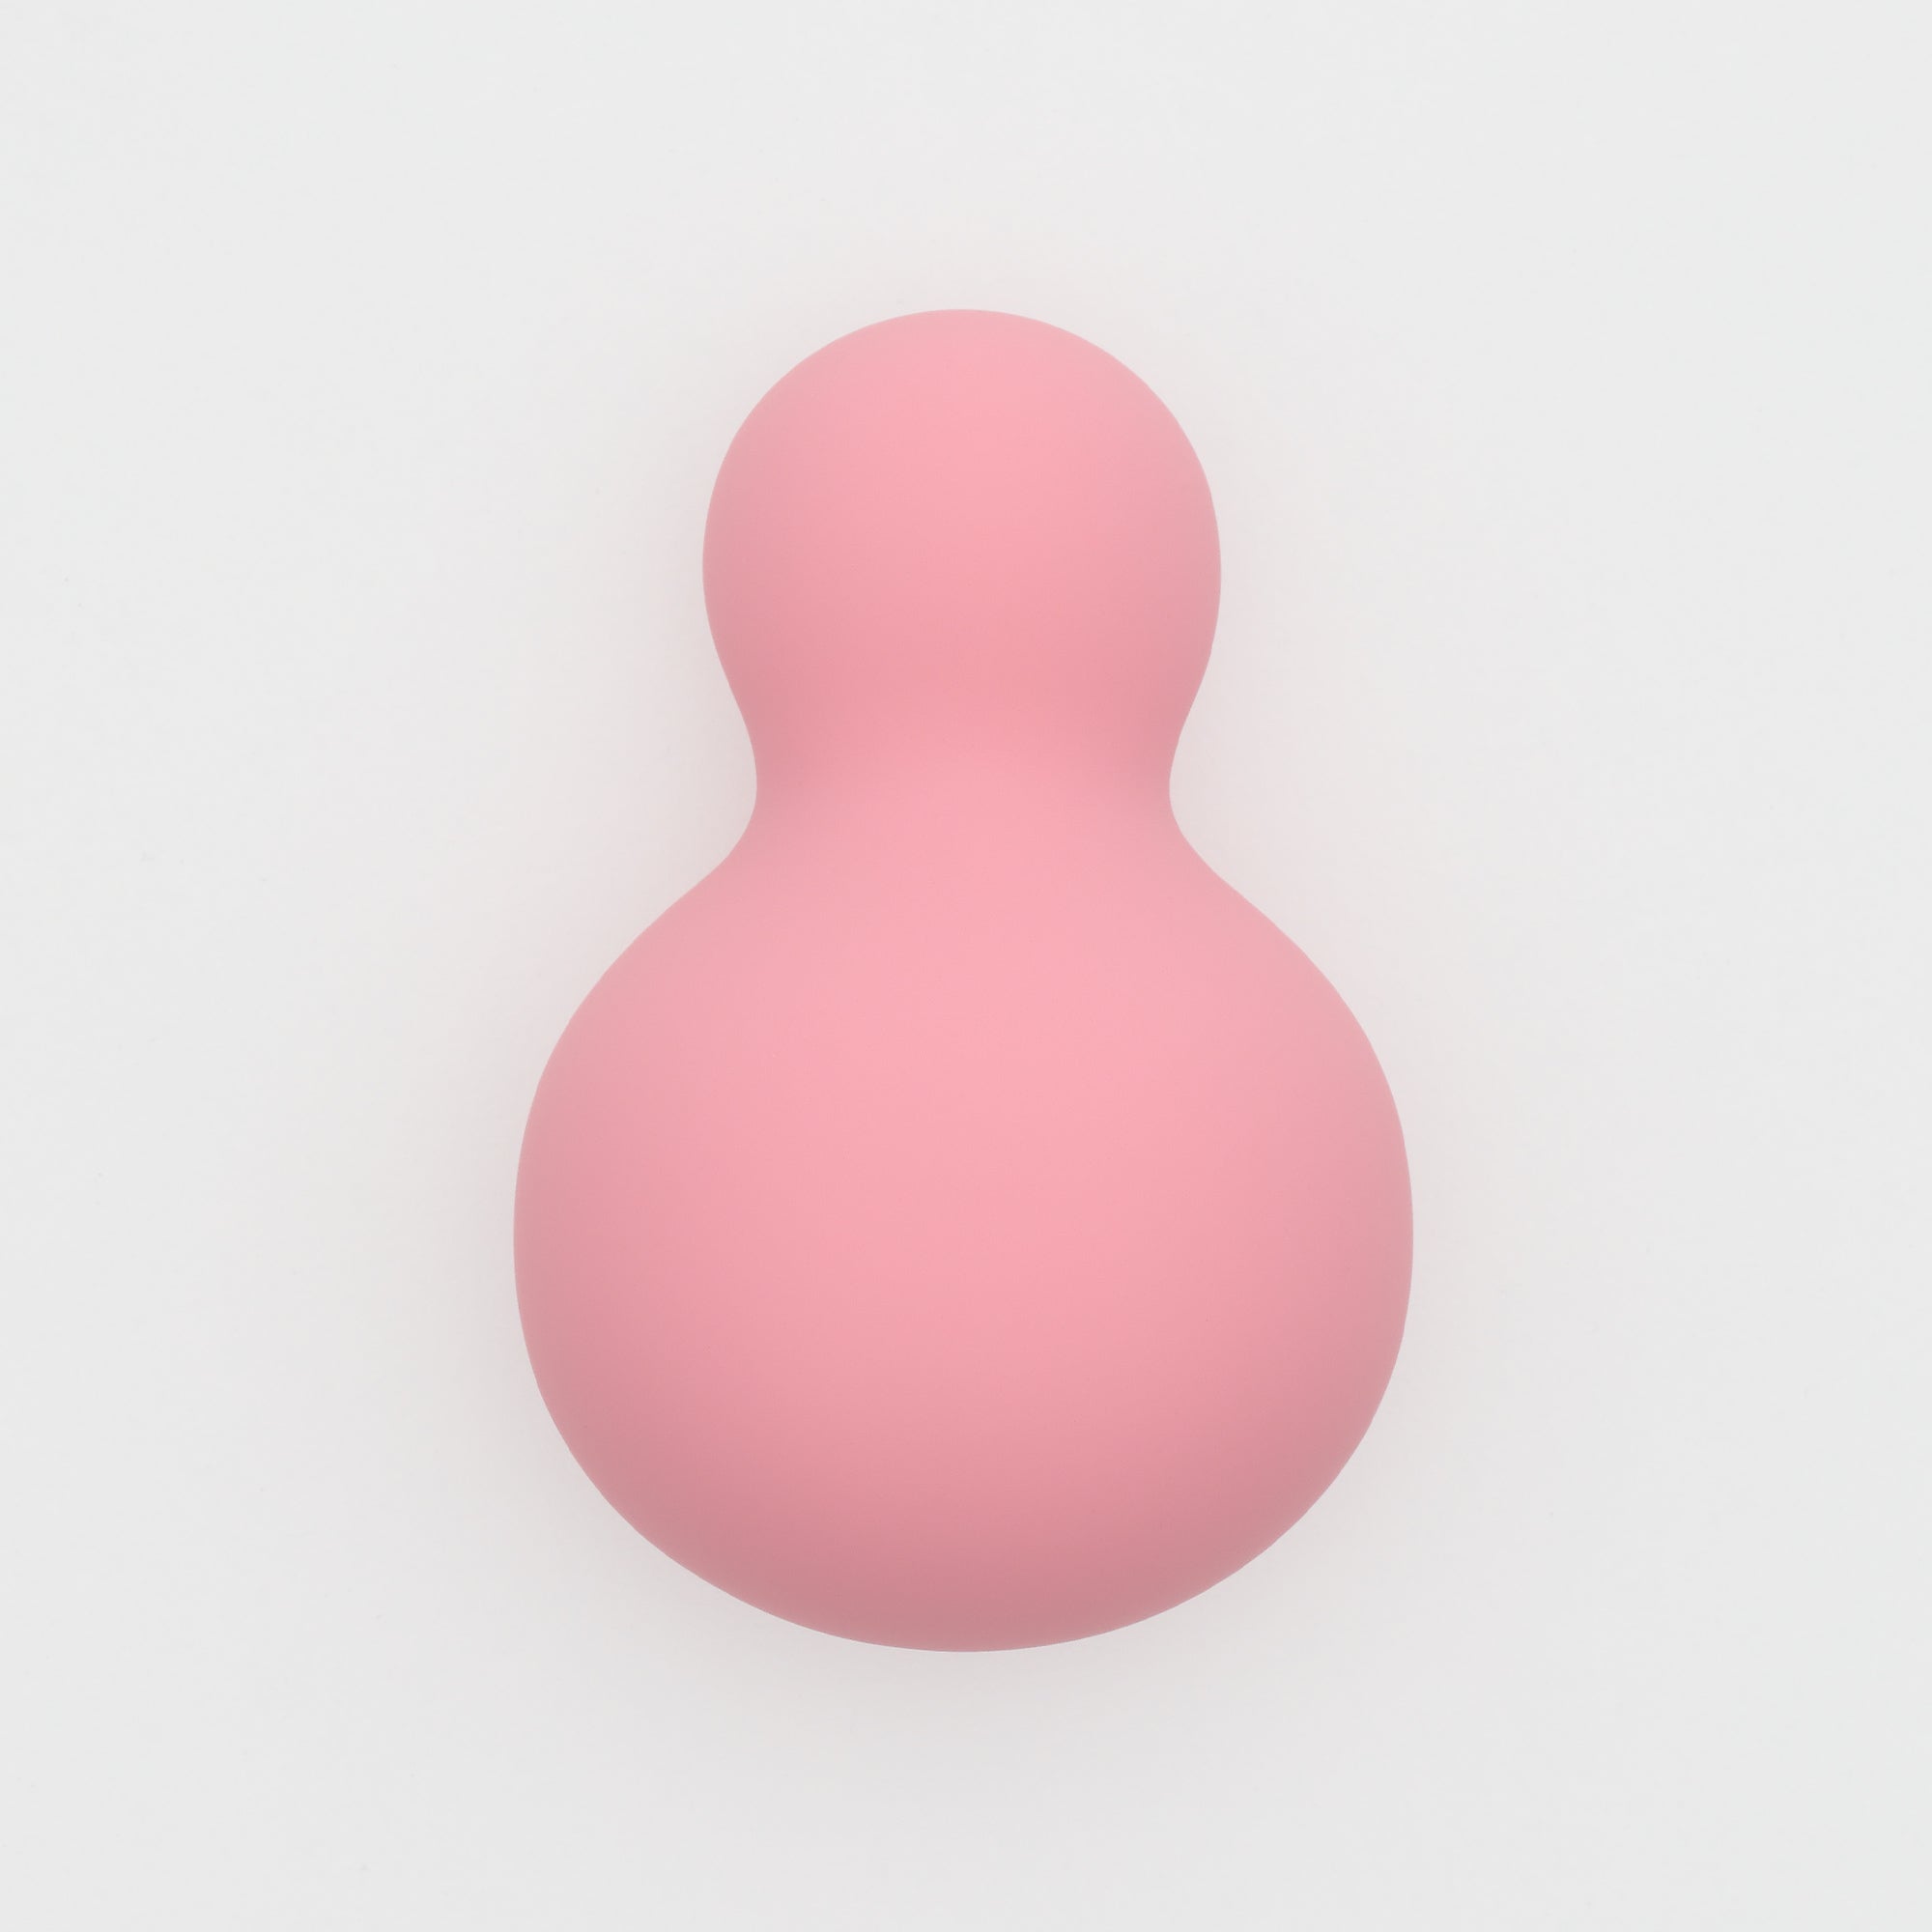 Yuki Nadeshiko Pink, a sophisticated female personal pleasure device designed for ergonomic comfort and intimate enjoyment. With a soft pink hue and graceful curves, this product is available from the UK TENGA STORE and reflects an artful blend of form and function